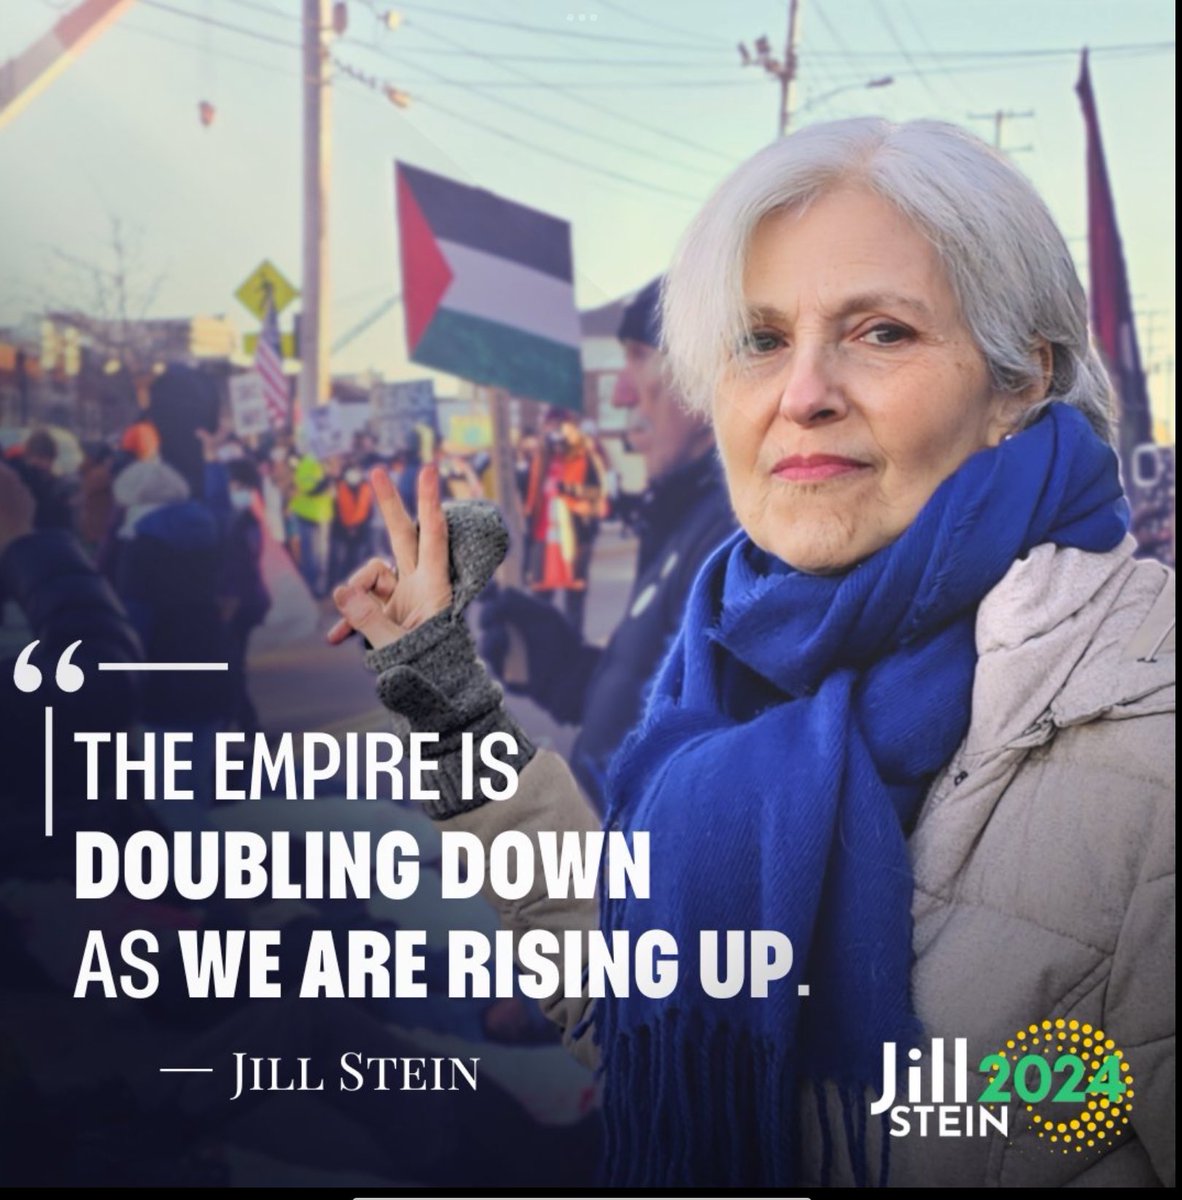 @TurboKitty @HeySaltyDog Jill Stein has principals something the 2 old white guys wouldn't even know how to spell